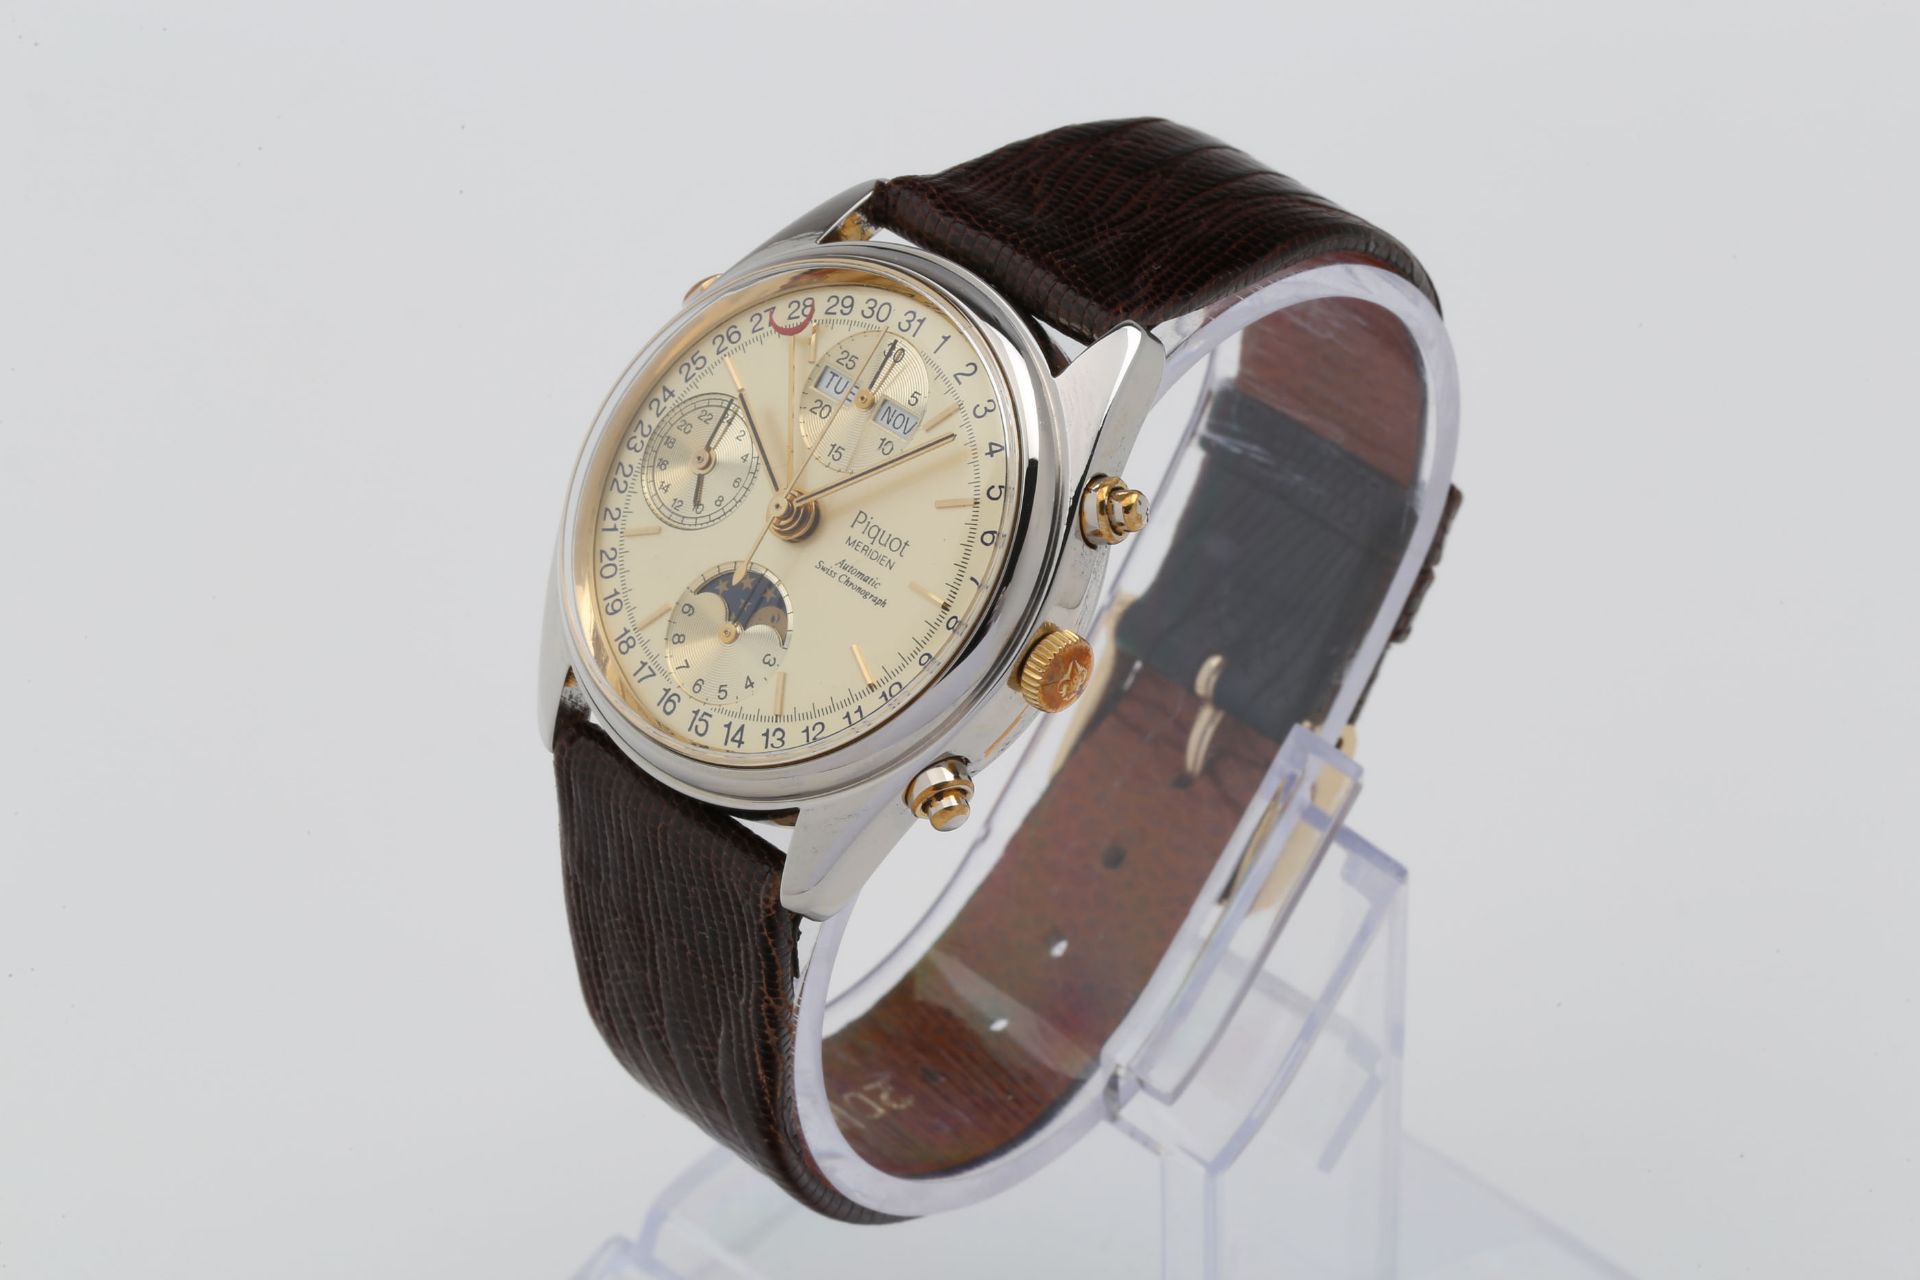 PIQUOT MERIDIEN CHRONO WITH FULL CALENDER - Image 2 of 4